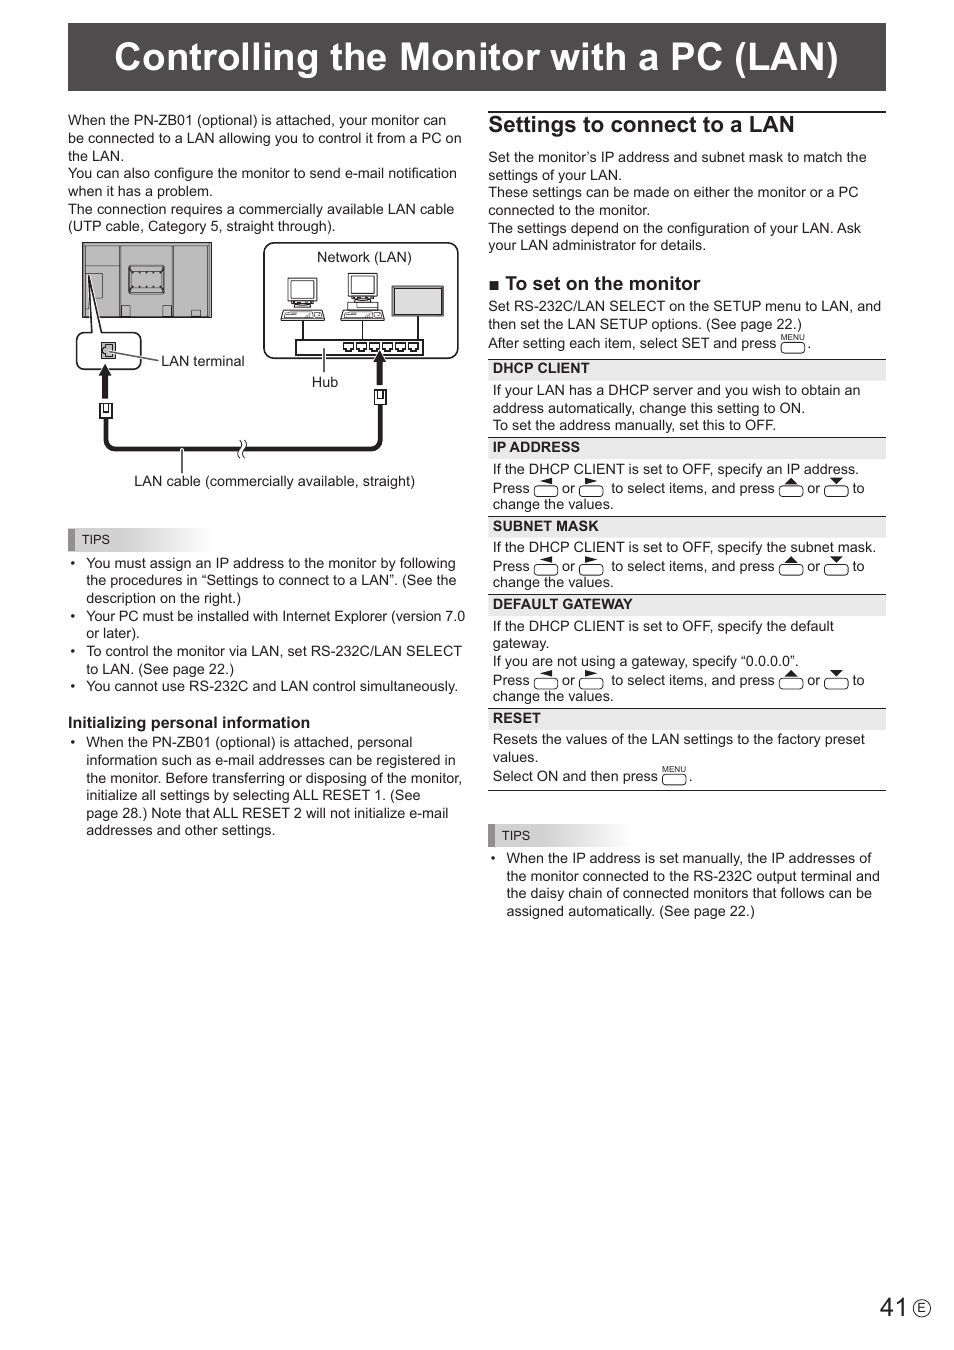 Controlling the monitor with a pc (lan), Settings to connect to a lan | Sharp PN-E802 User Manual | Page 41 / 56